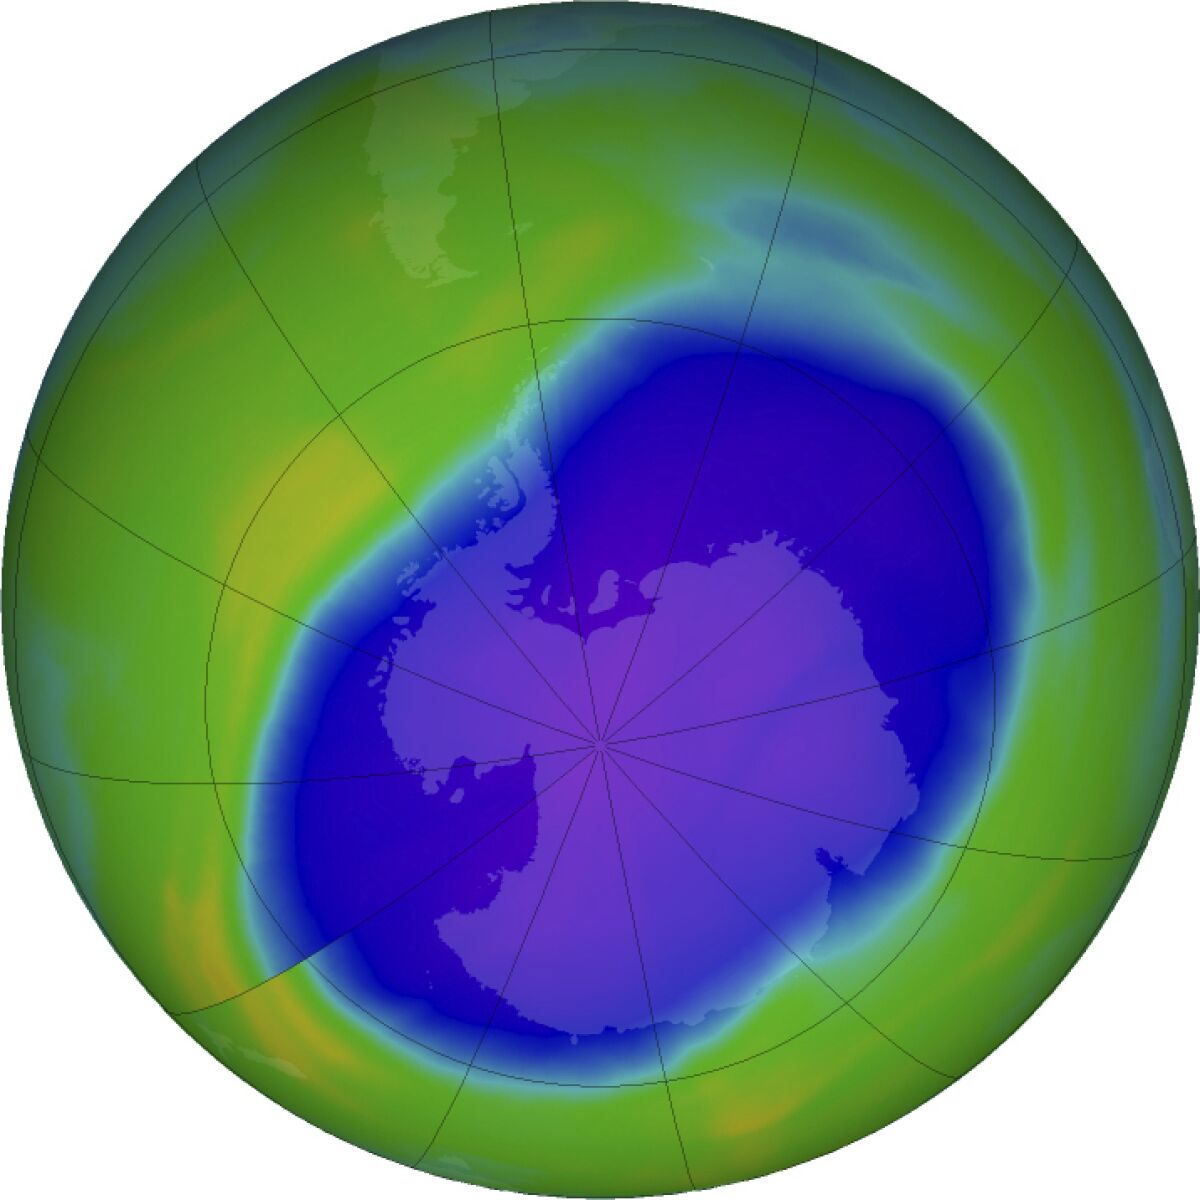 Blue and purple areas  show the hole in Earth's protective ozone layer